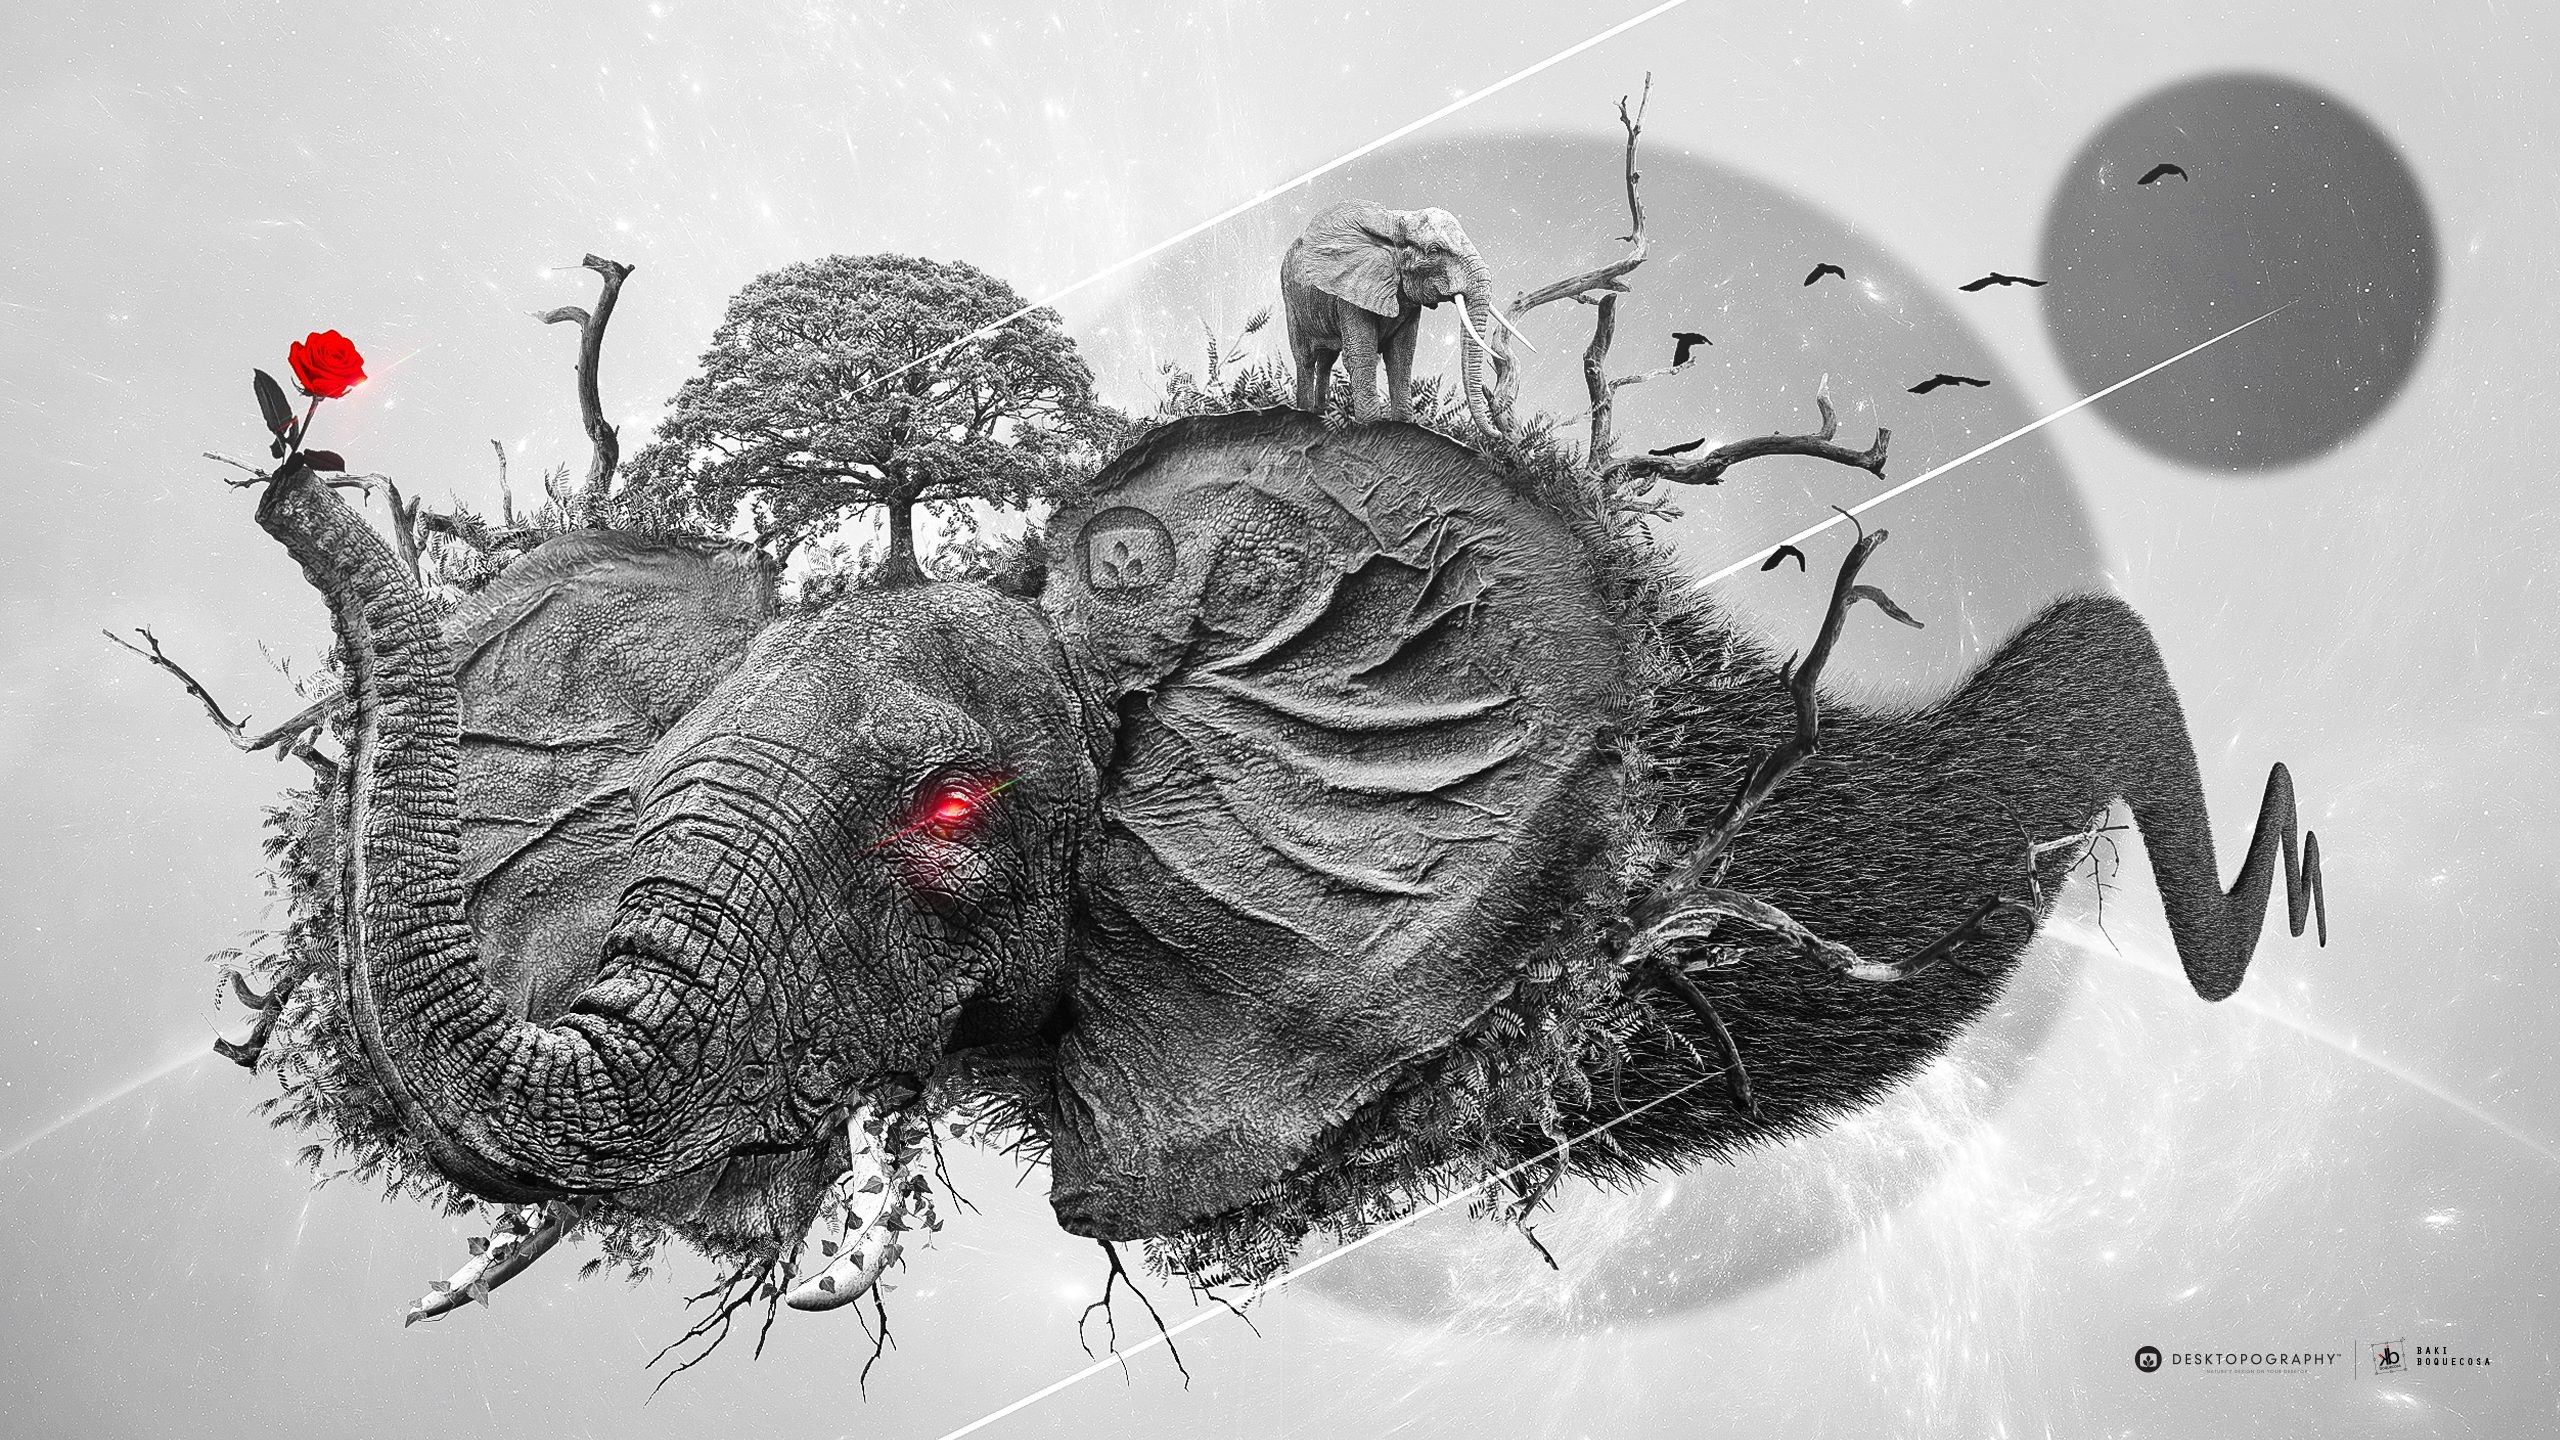 Free photo A painted elephant holding a red flower in its trunk